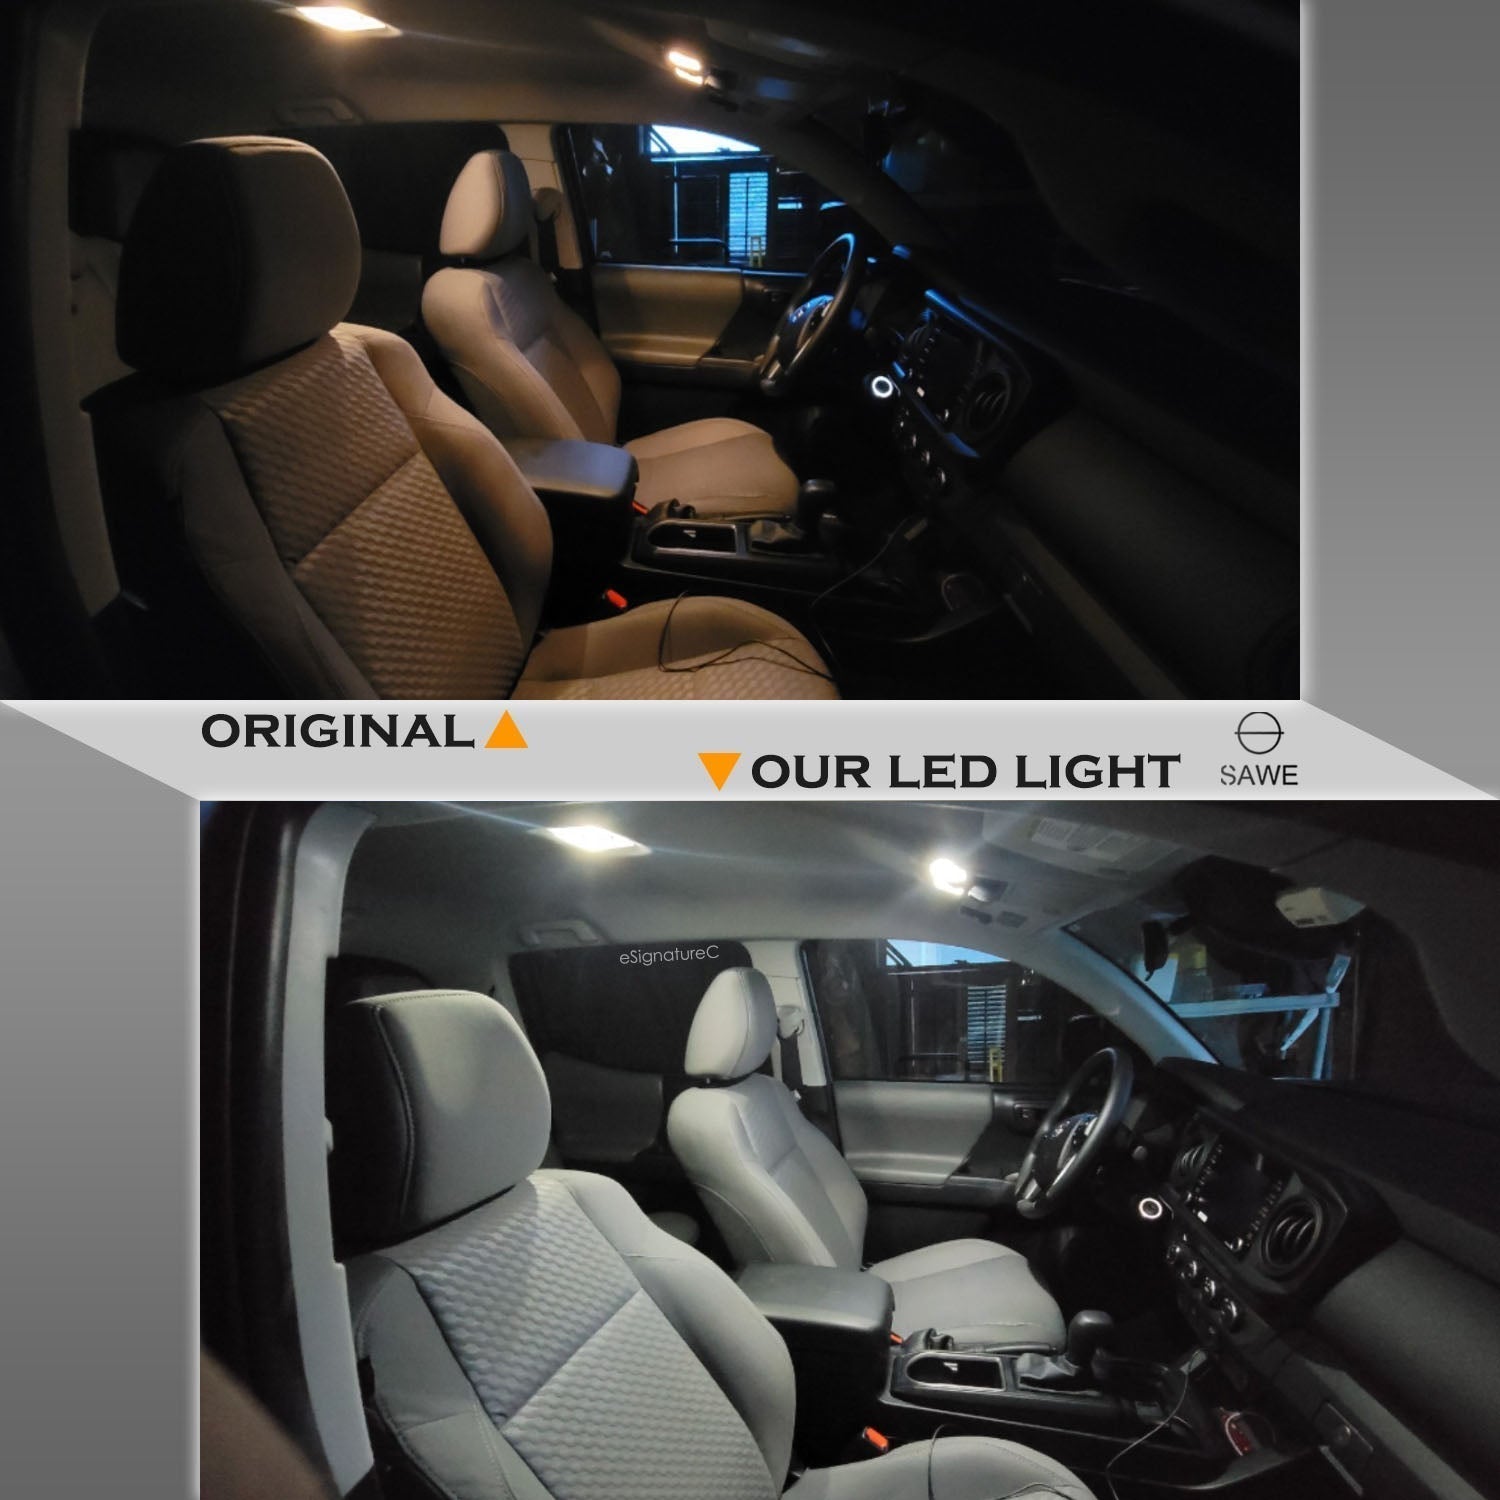 For Toyota Sienna Interior LED Lights - Dome & Map Lights Package Kit for 1998 - 2003 - White